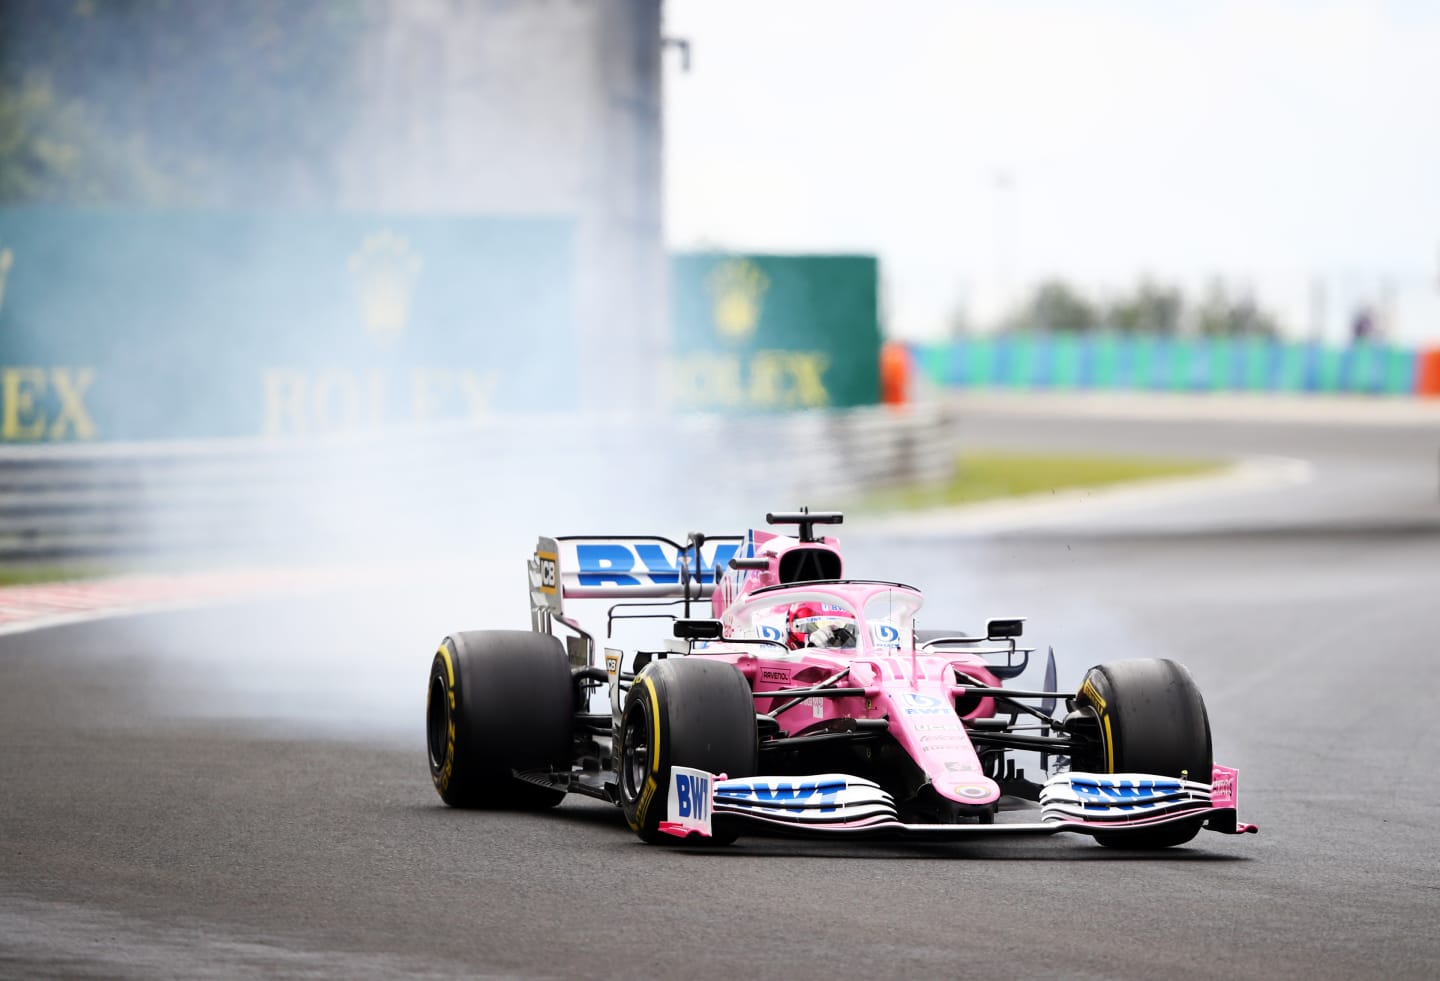 BUDAPEST, HUNGARY - JULY 19: Sergio Perez of Mexico driving the (11) Racing Point RP20 Mercedes on track during the Formula One Grand Prix of Hungary at Hungaroring on July 19, 2020 in Budapest, Hungary. (Photo by Bryn Lennon/Getty Images)